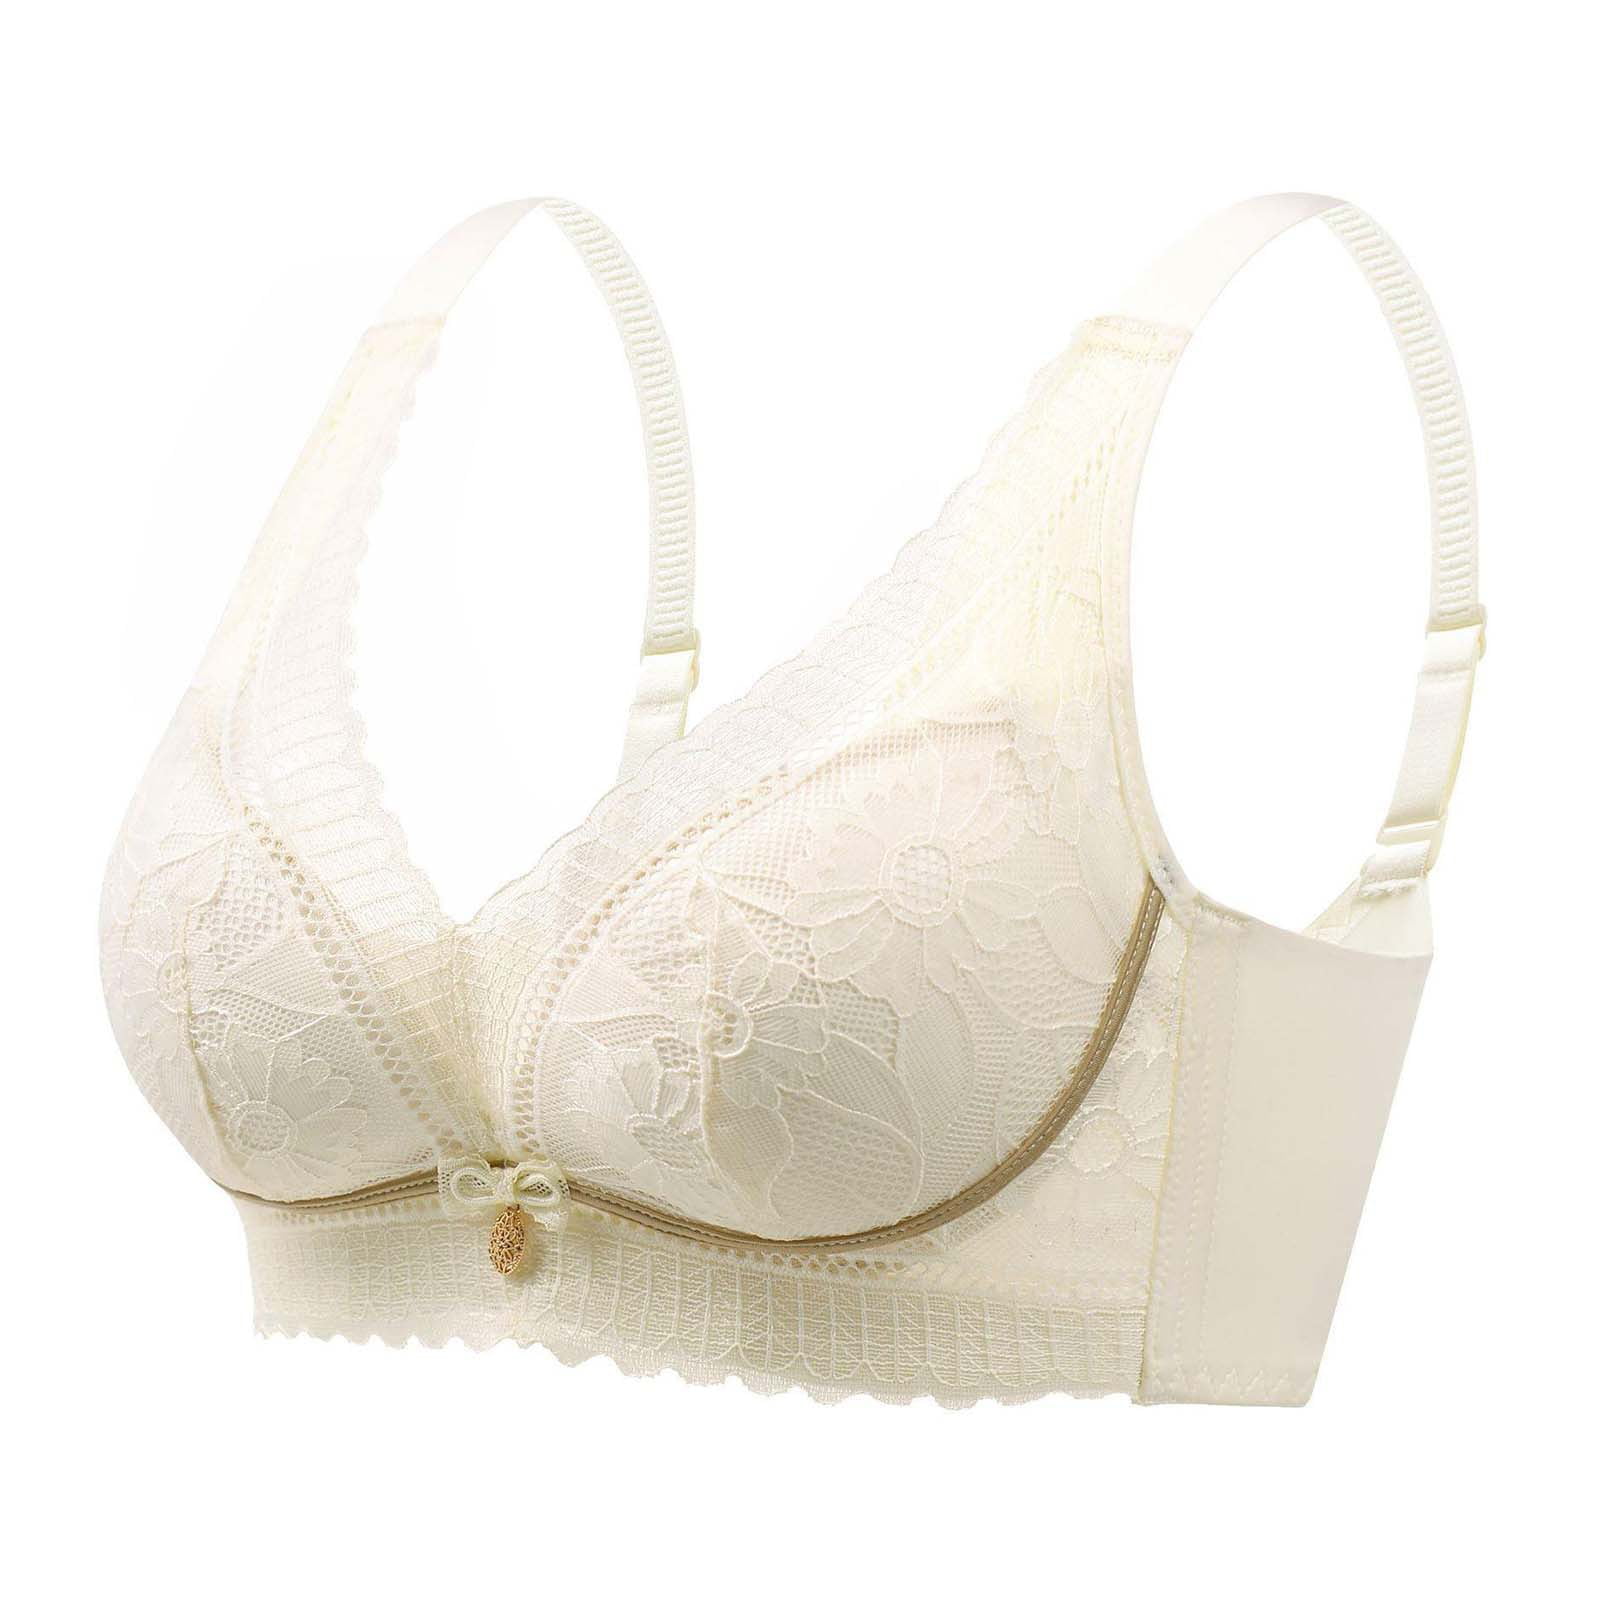 Aayomet Push Up Bras For Women Womens Lace Gathered Bra Straps Cup